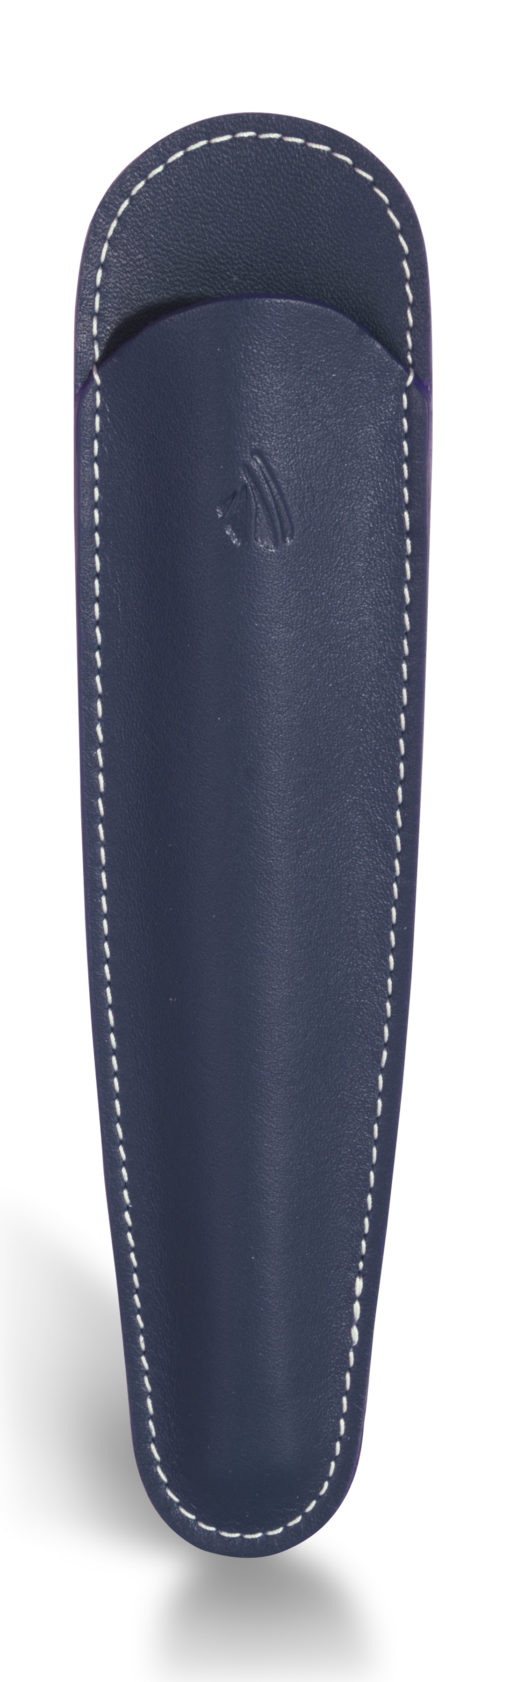 RECIFE LEATHER PEN POUCH NAVY BLUE